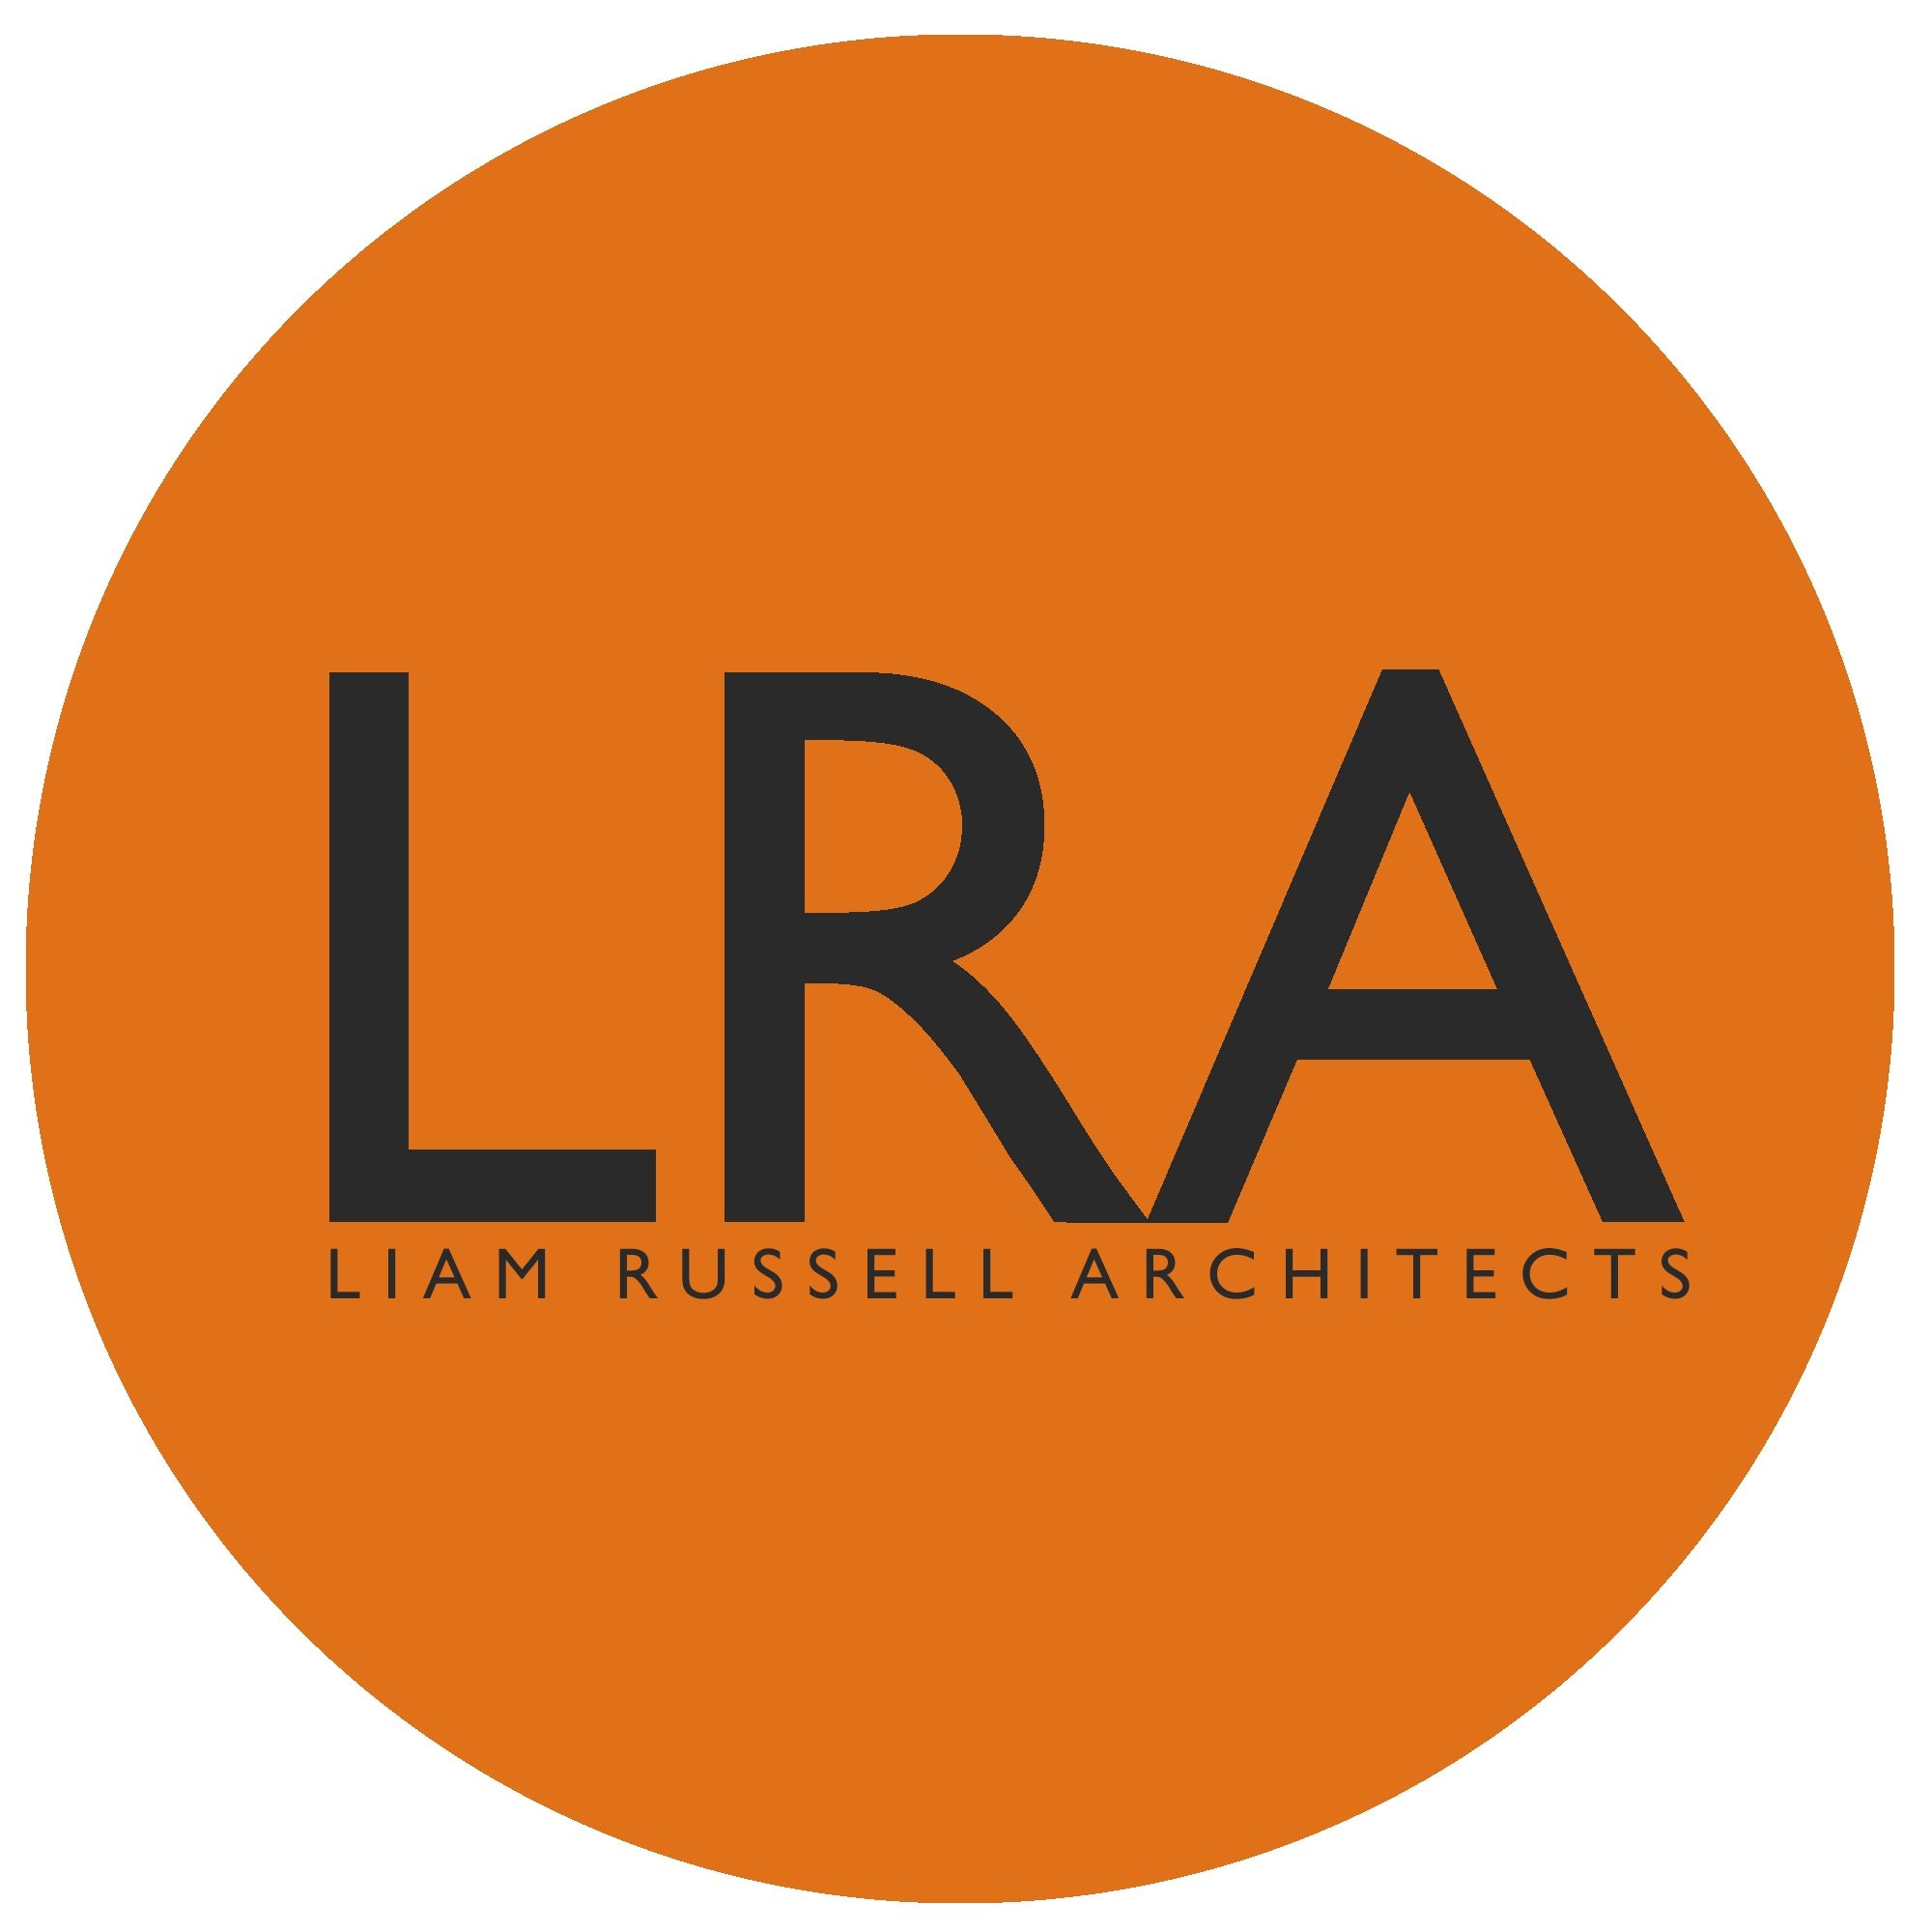 Liam Russell Architects